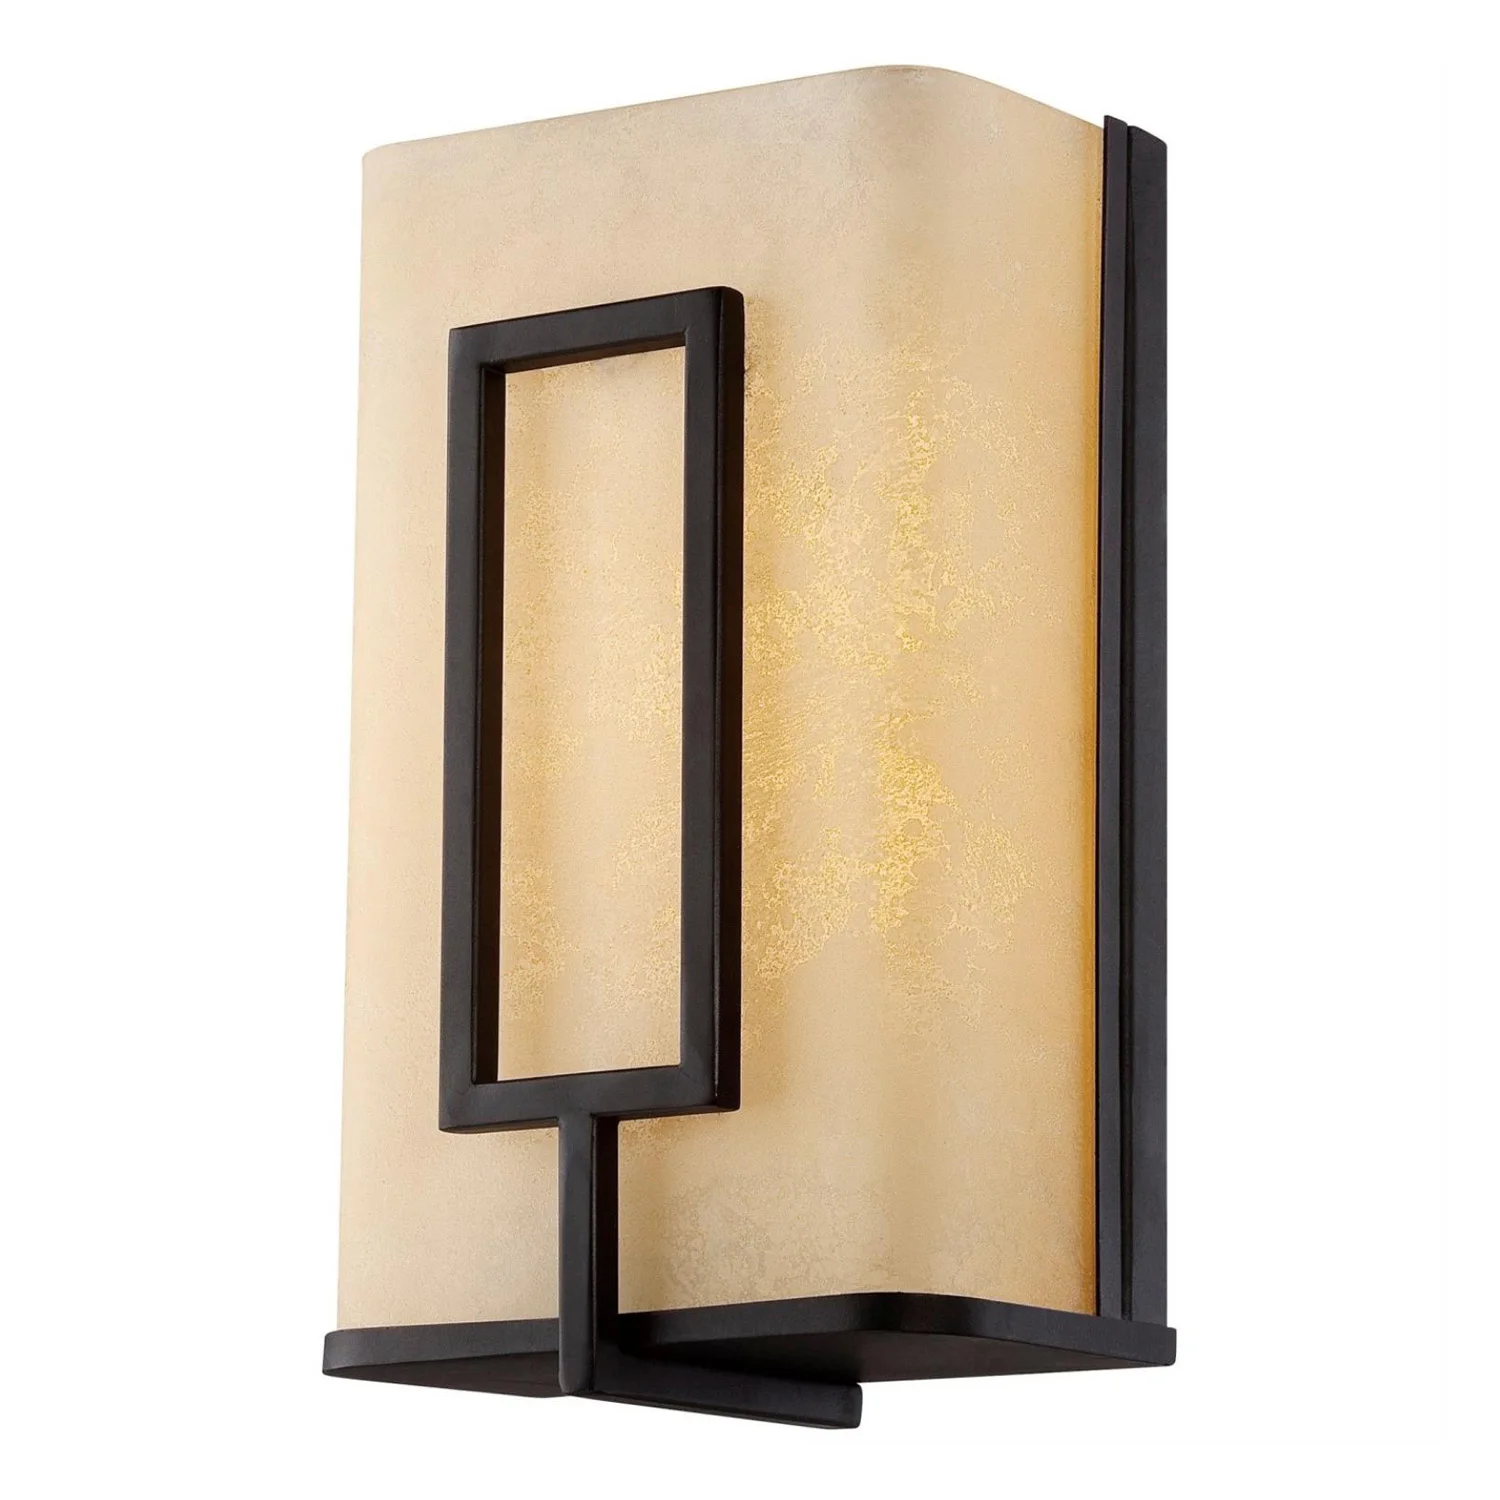 Ideal for living rooms, bedrooms and foyers Sunlite LFX/WS/6/15W/DIM/30K LED 15 Watt Decorative Wall Sconce, 3000K Warm White